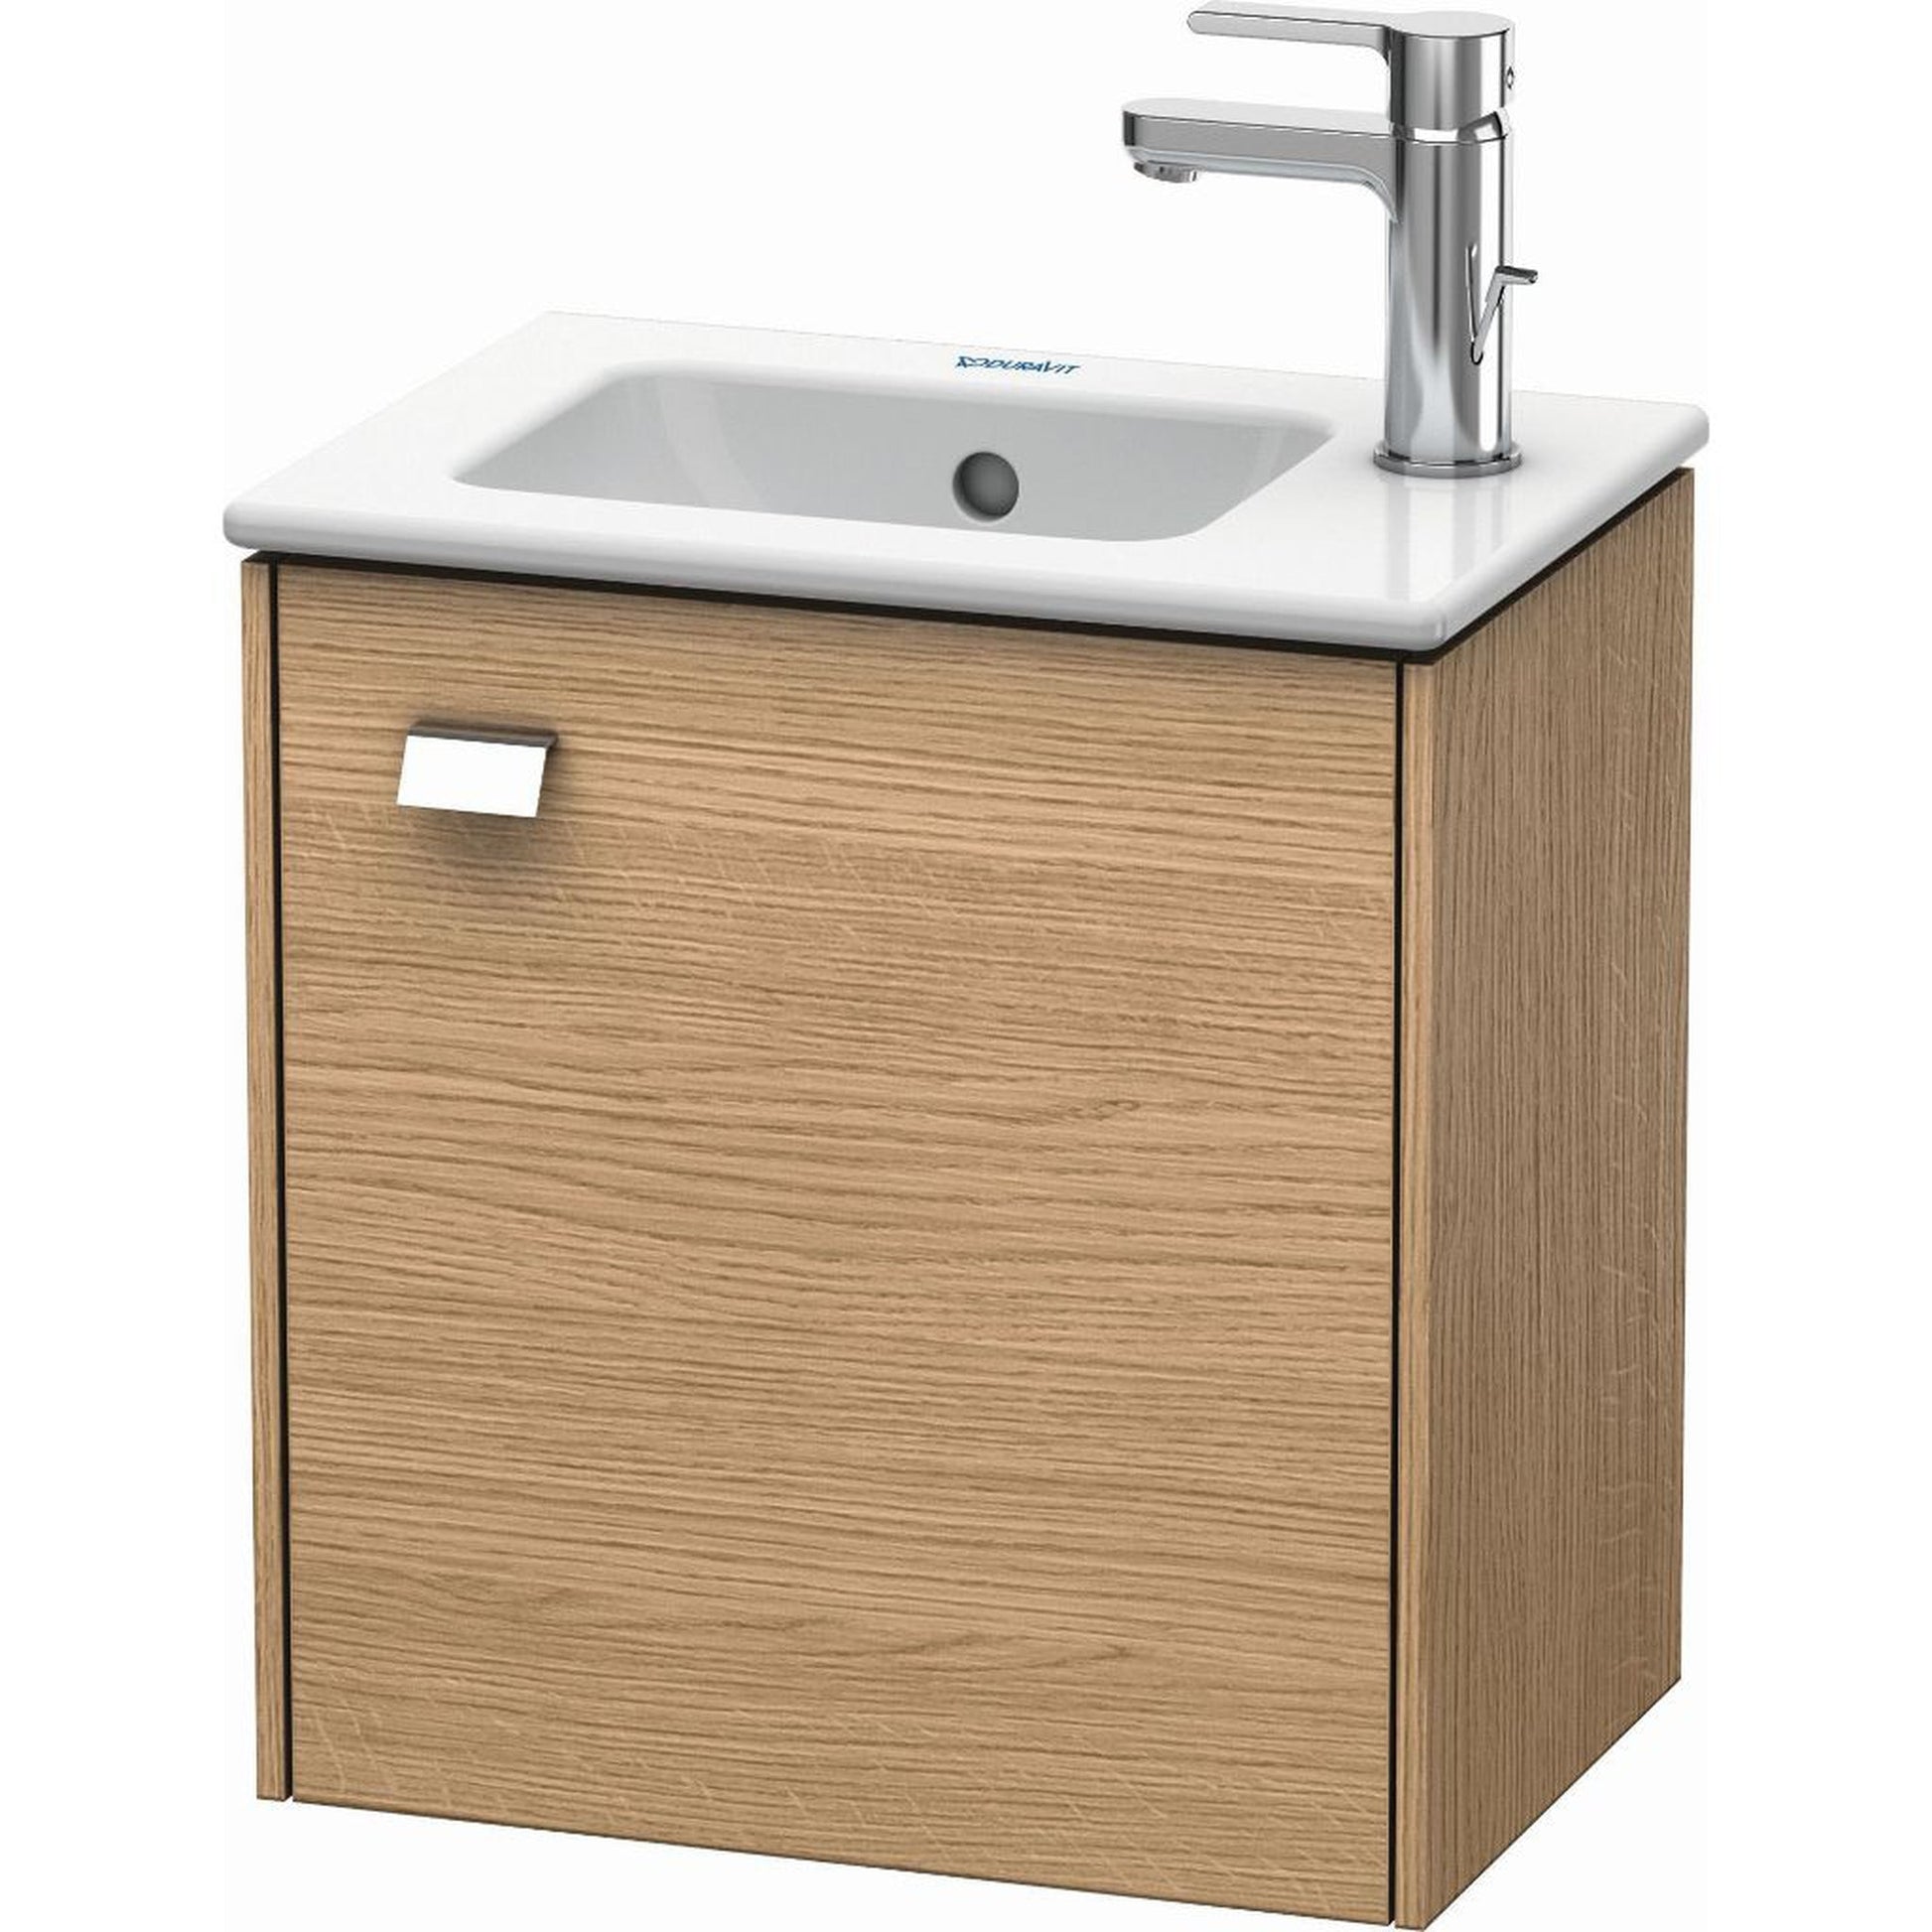 Duravit Brioso 17" x 17" x 11" Wall-Mount Vanity Unit With Right Hinge One Door Cabinet in European Oak and Chrome Handle